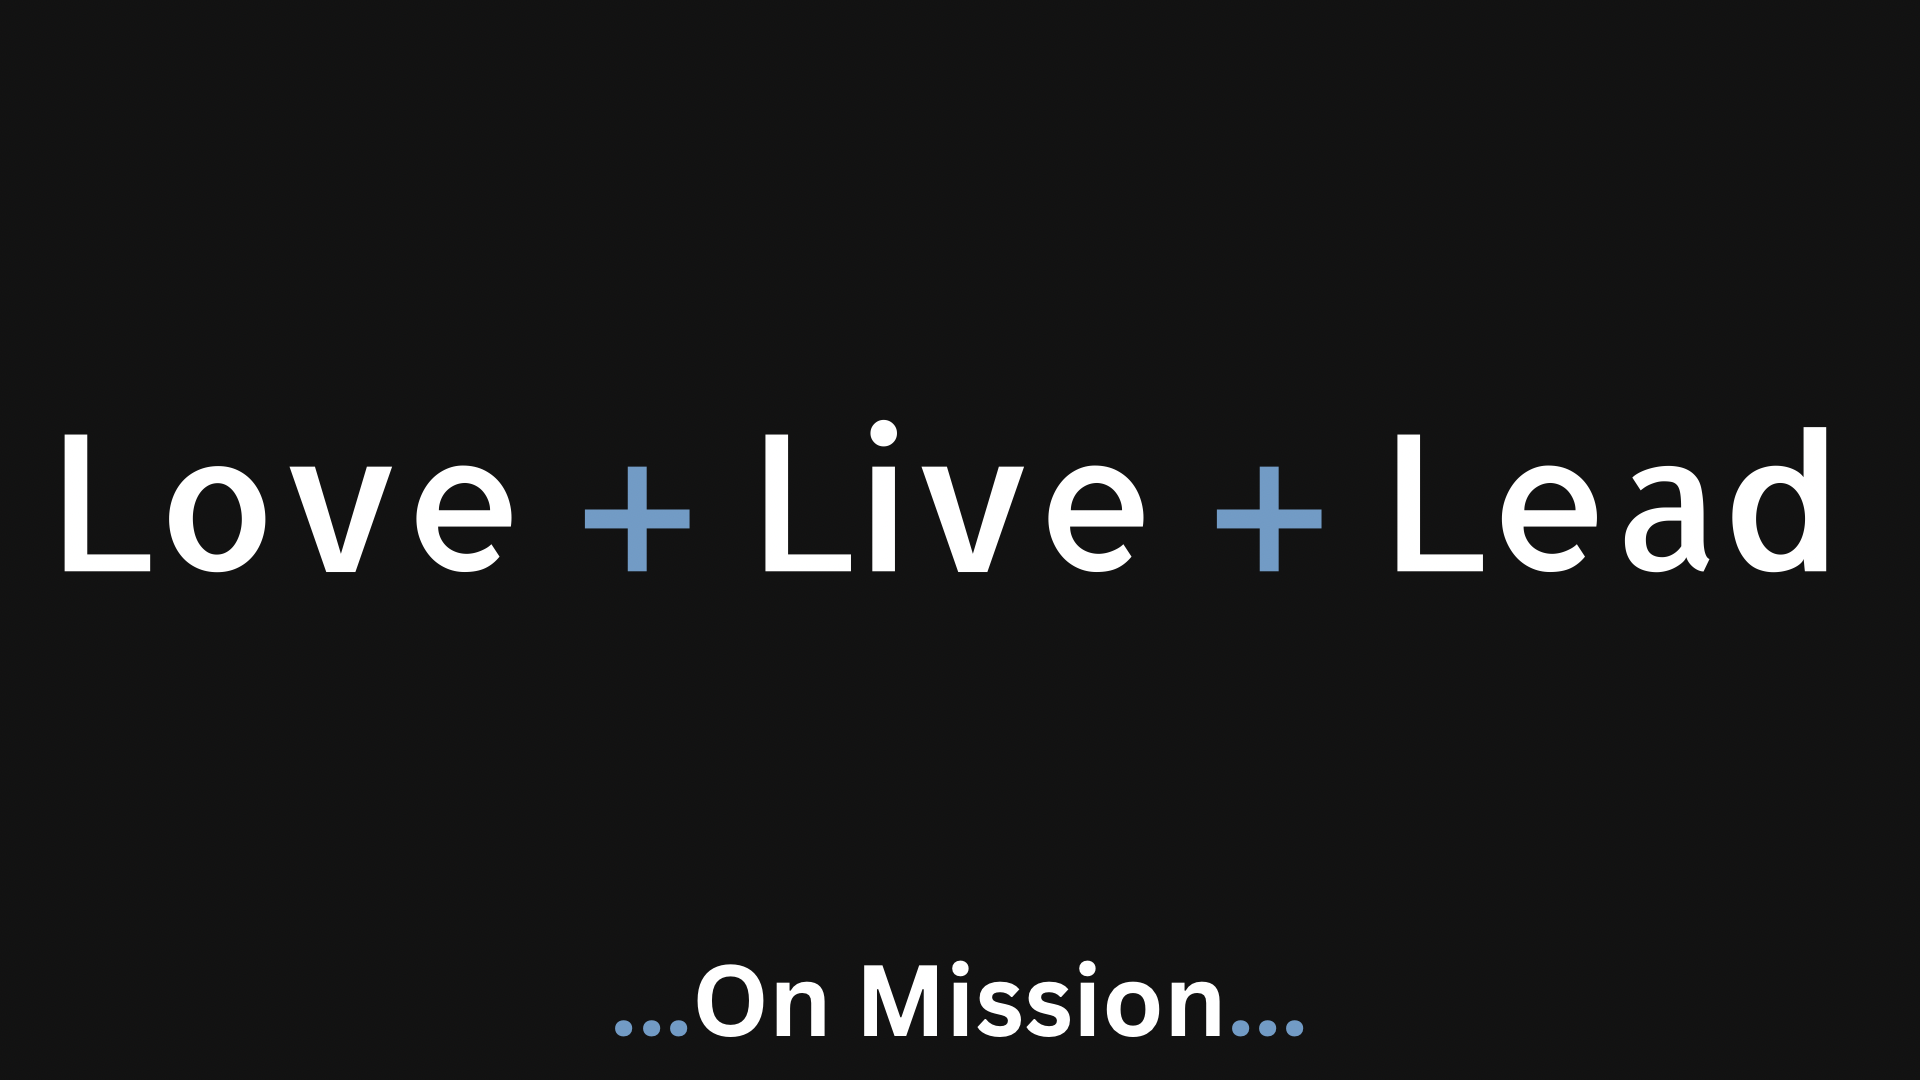 Love, Live, Lead…On Mission